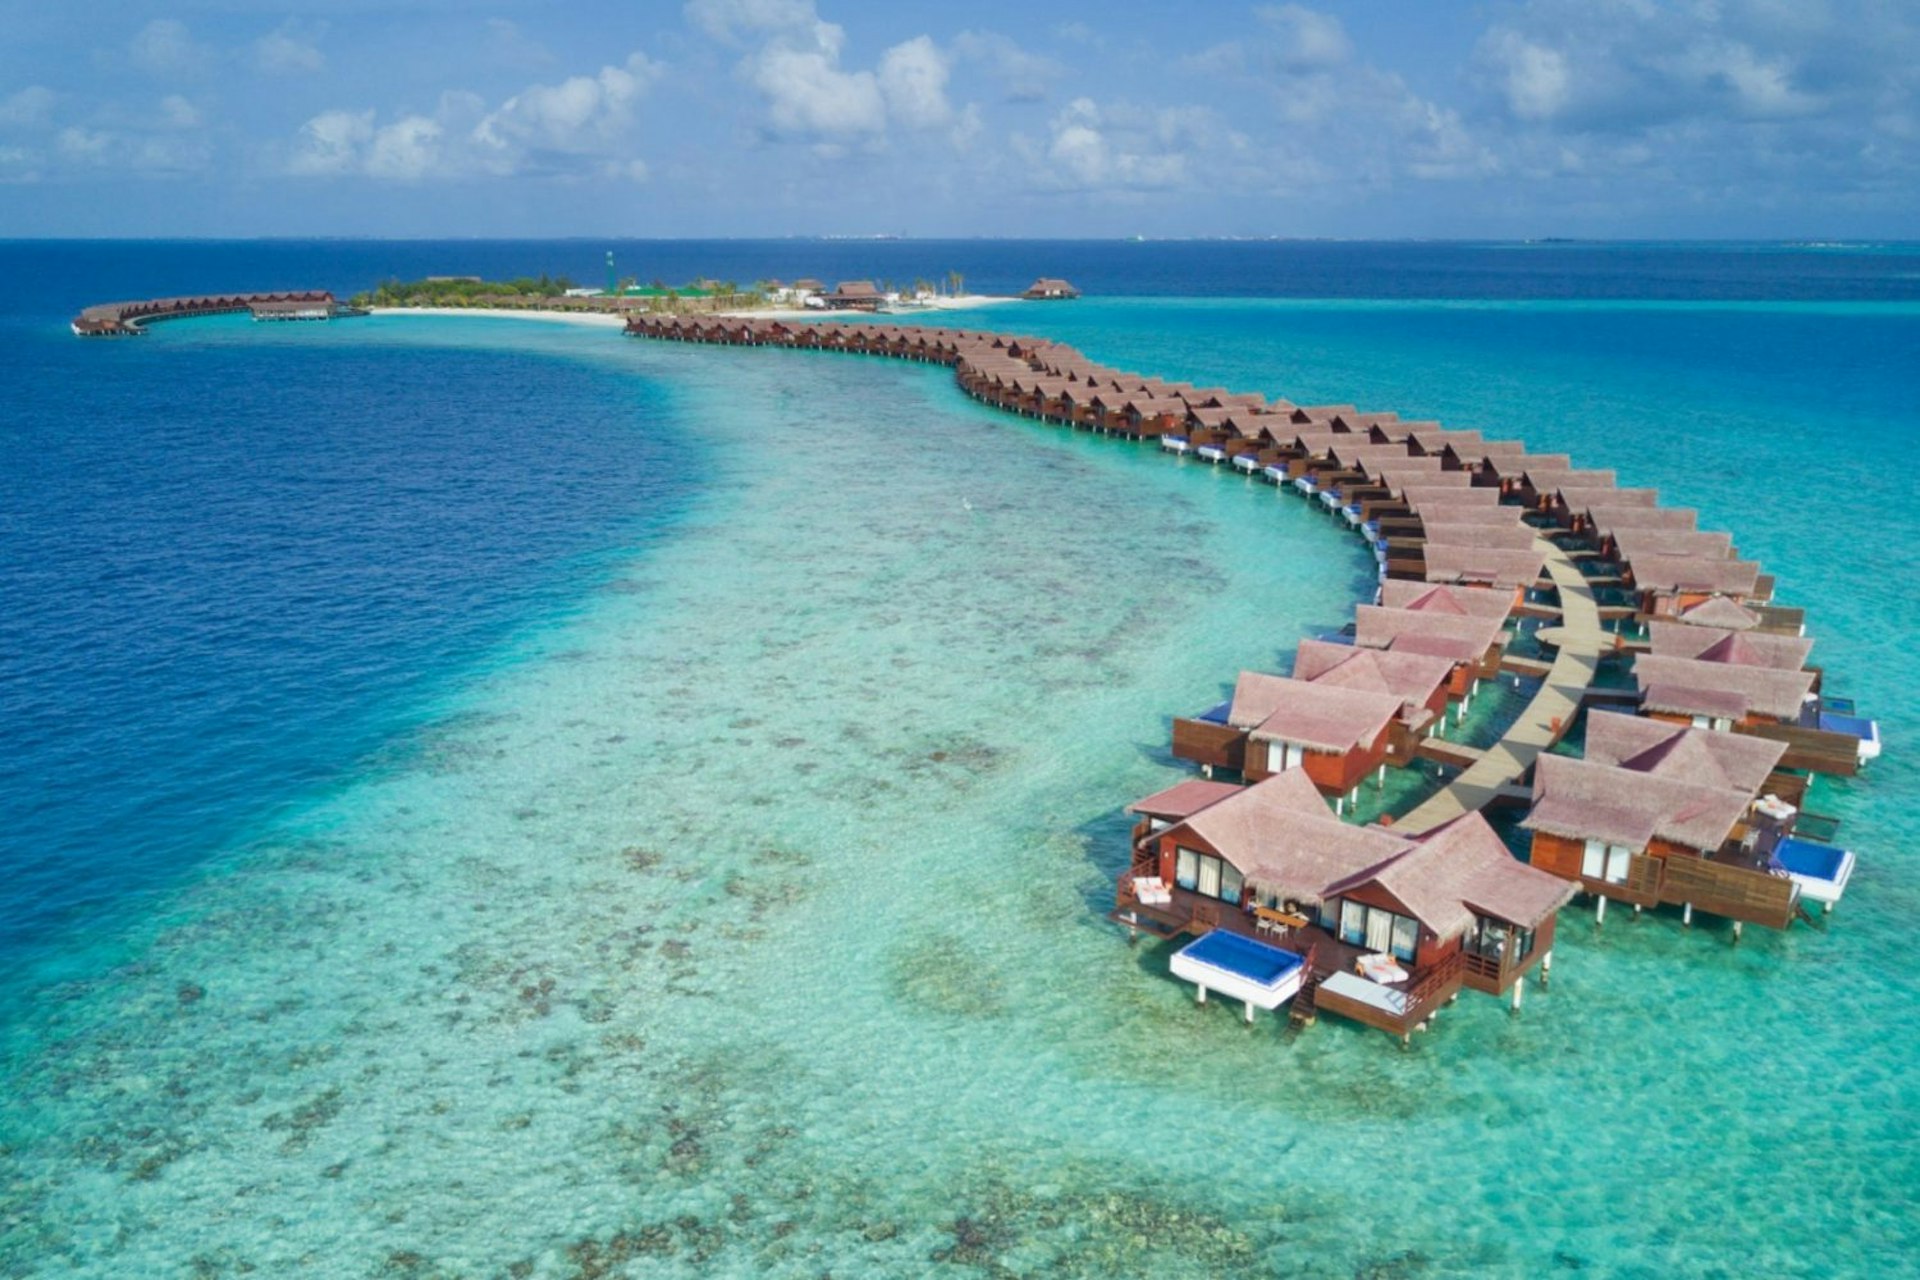 The overwater villas at the Grand Park Kodhipparu